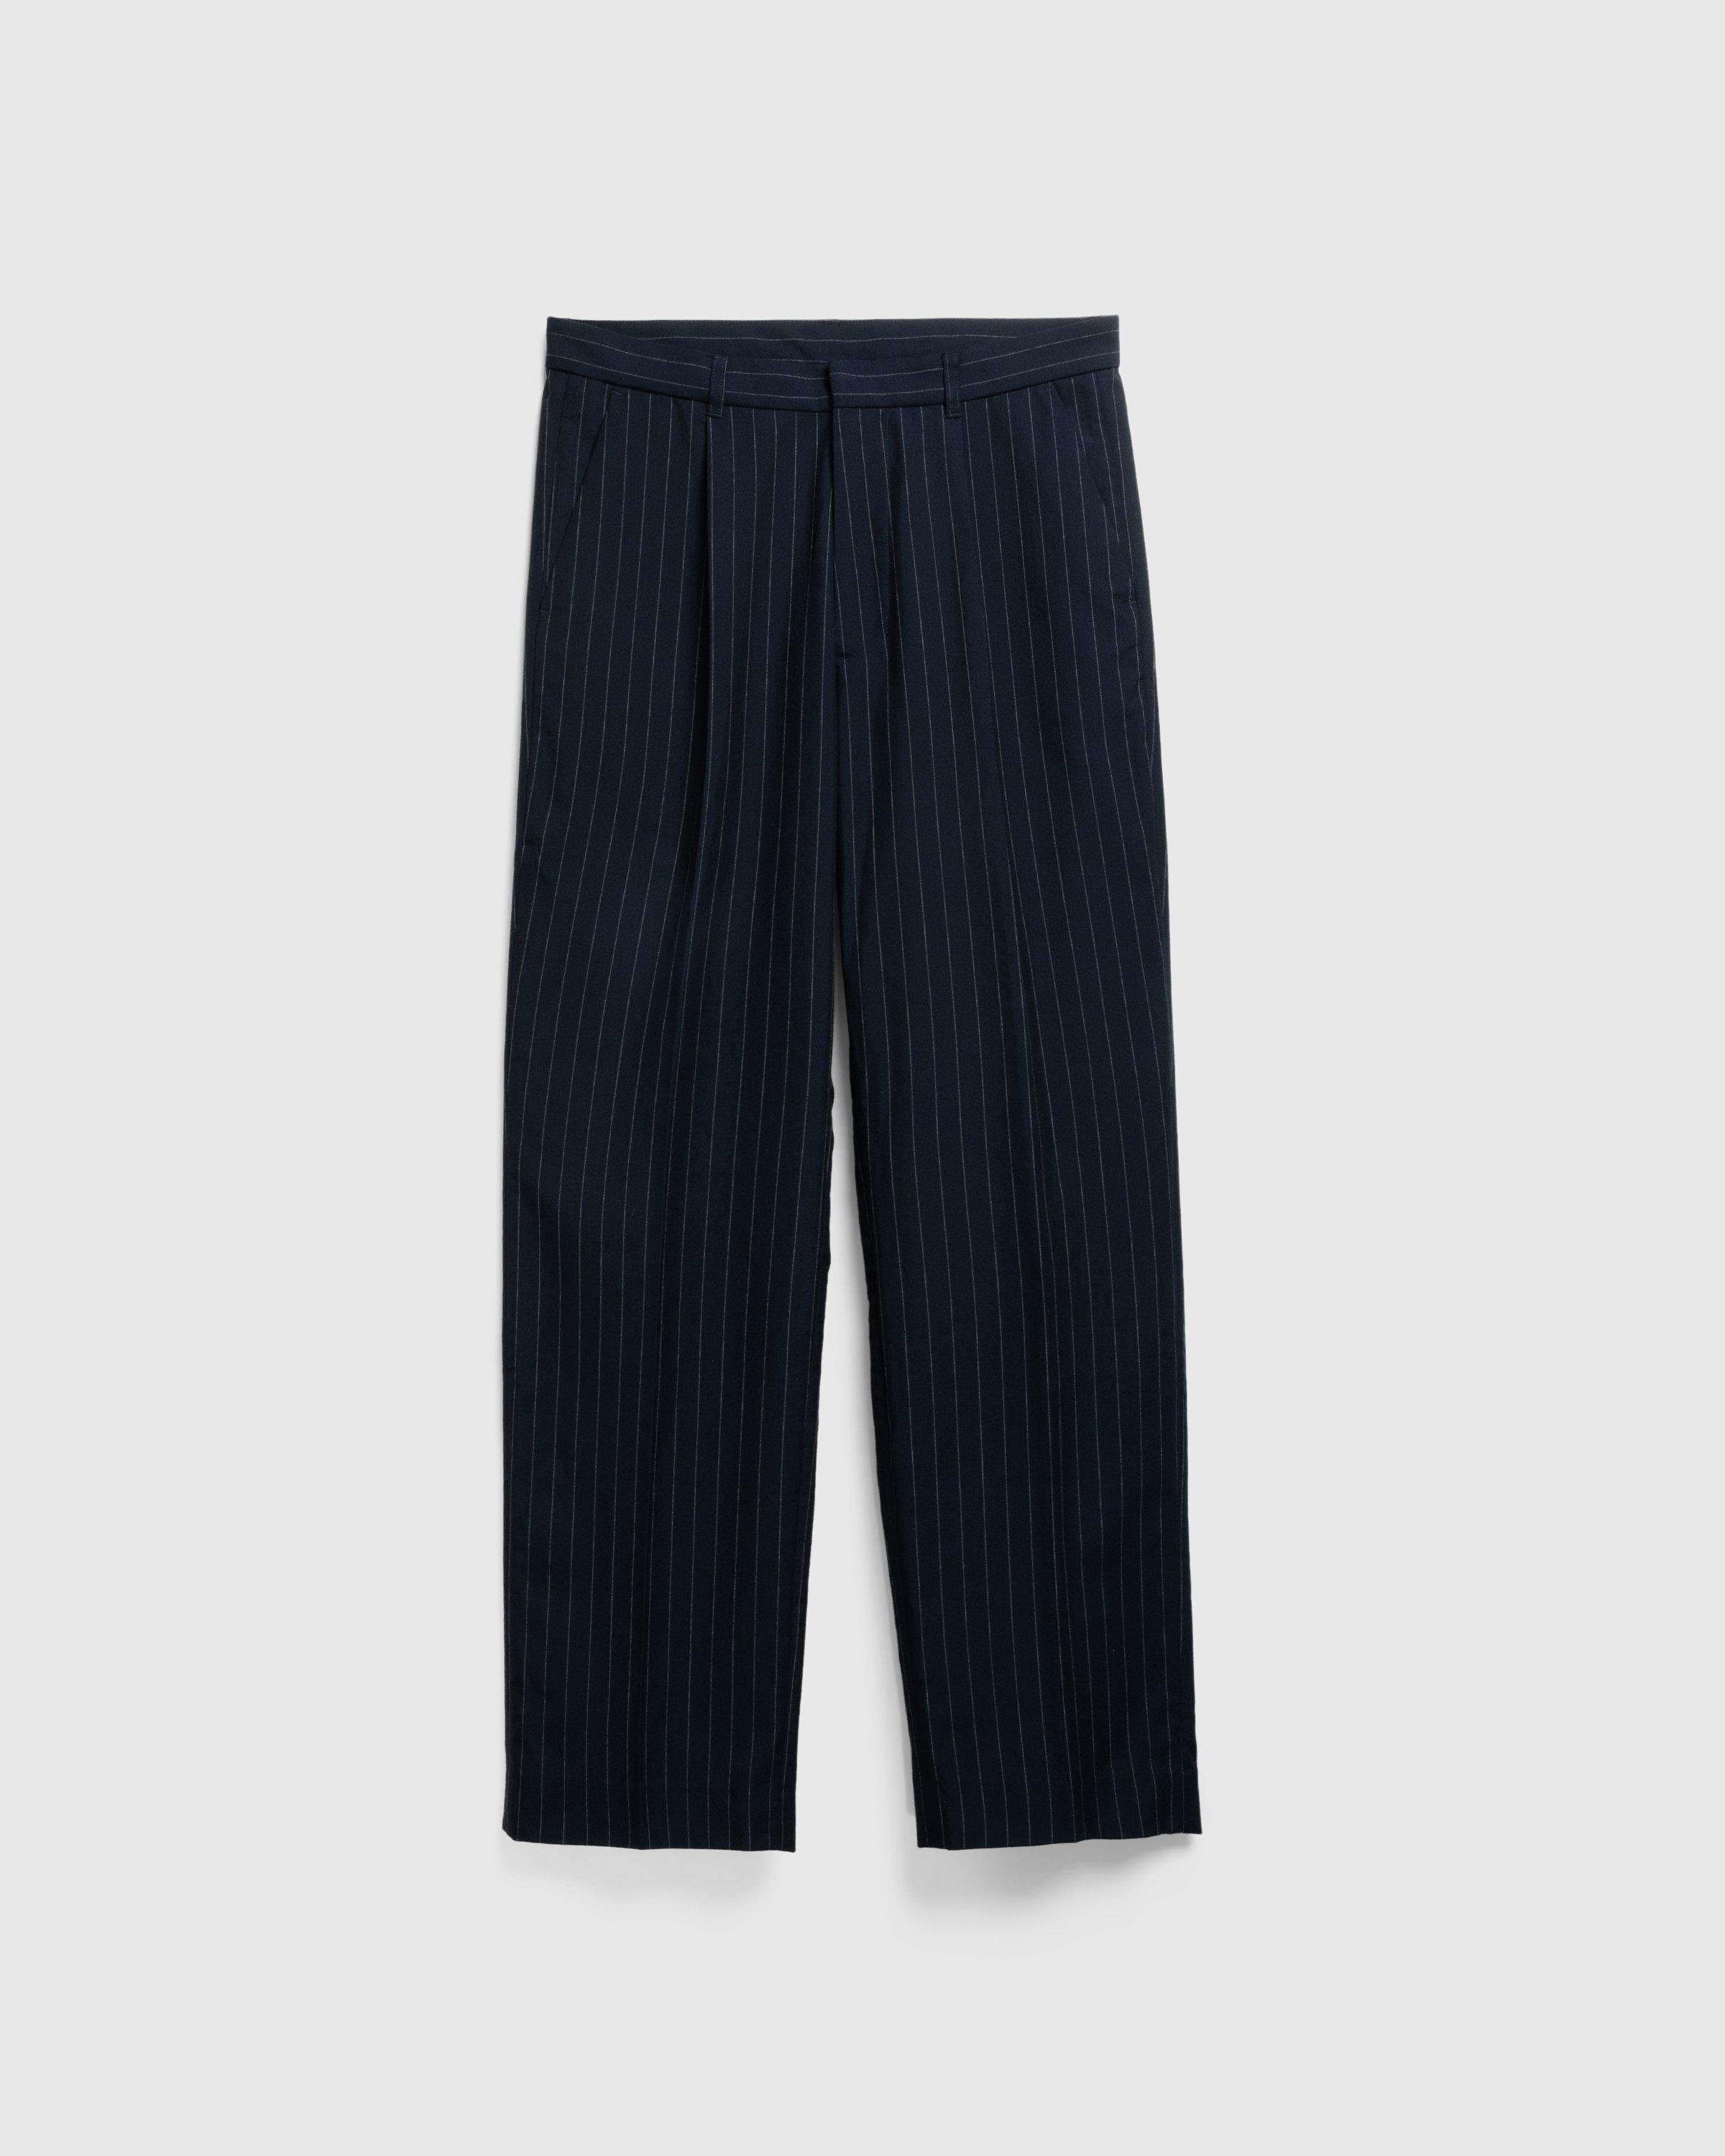 Highsnobiety HS05Tropical Suiting Pants Navy Striped by HIGHSNOBIETY